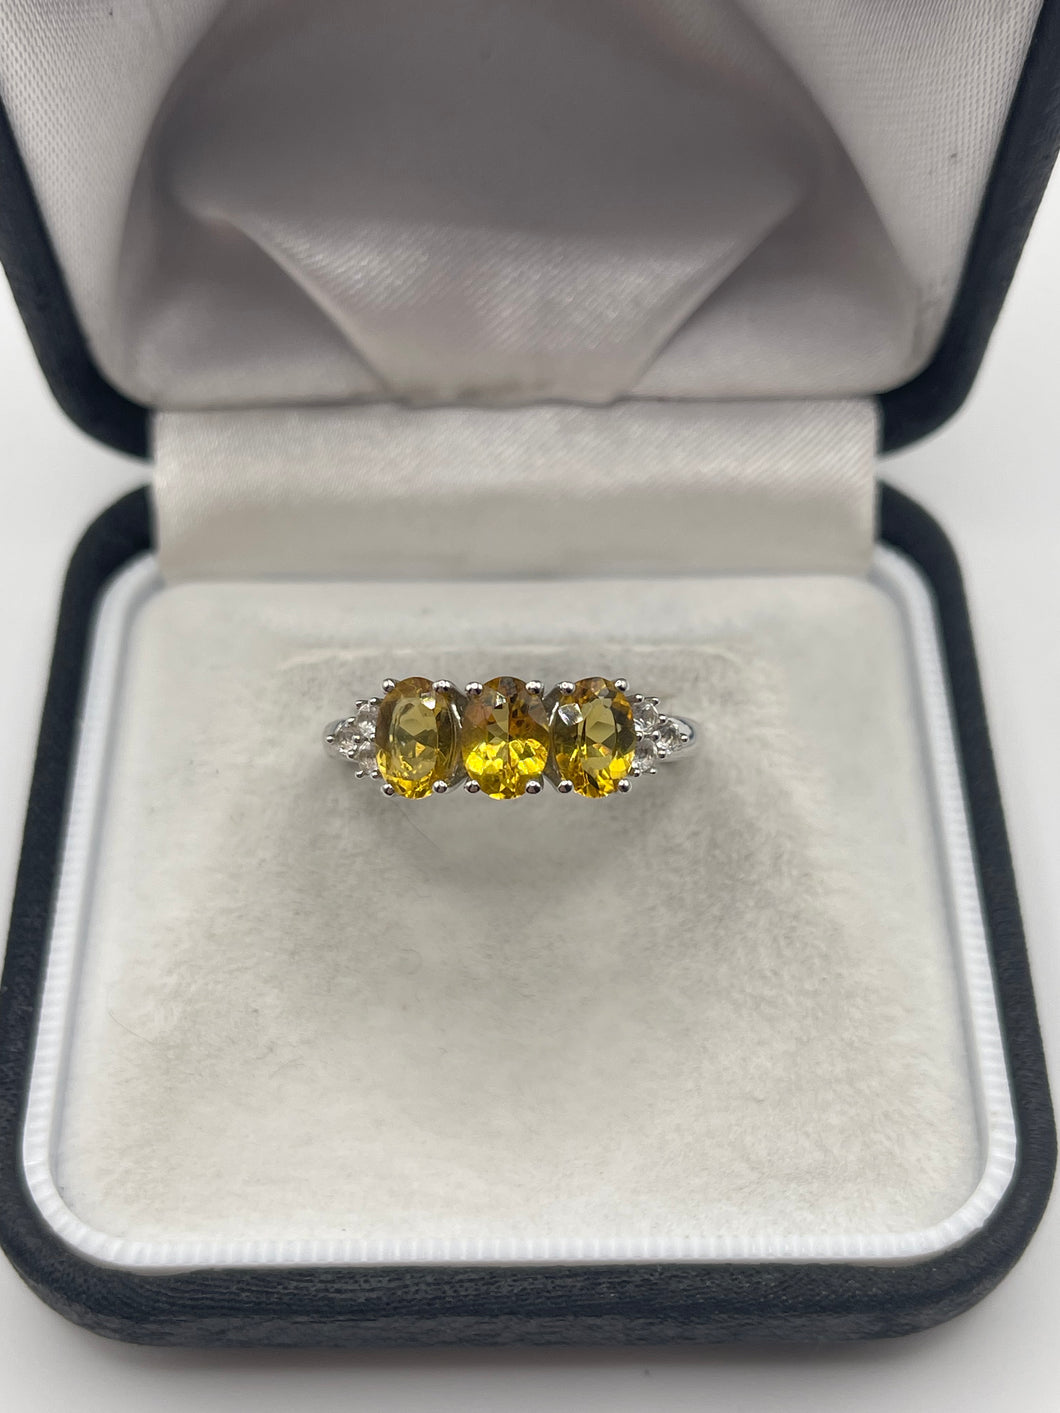 Silver citrine and topaz ring